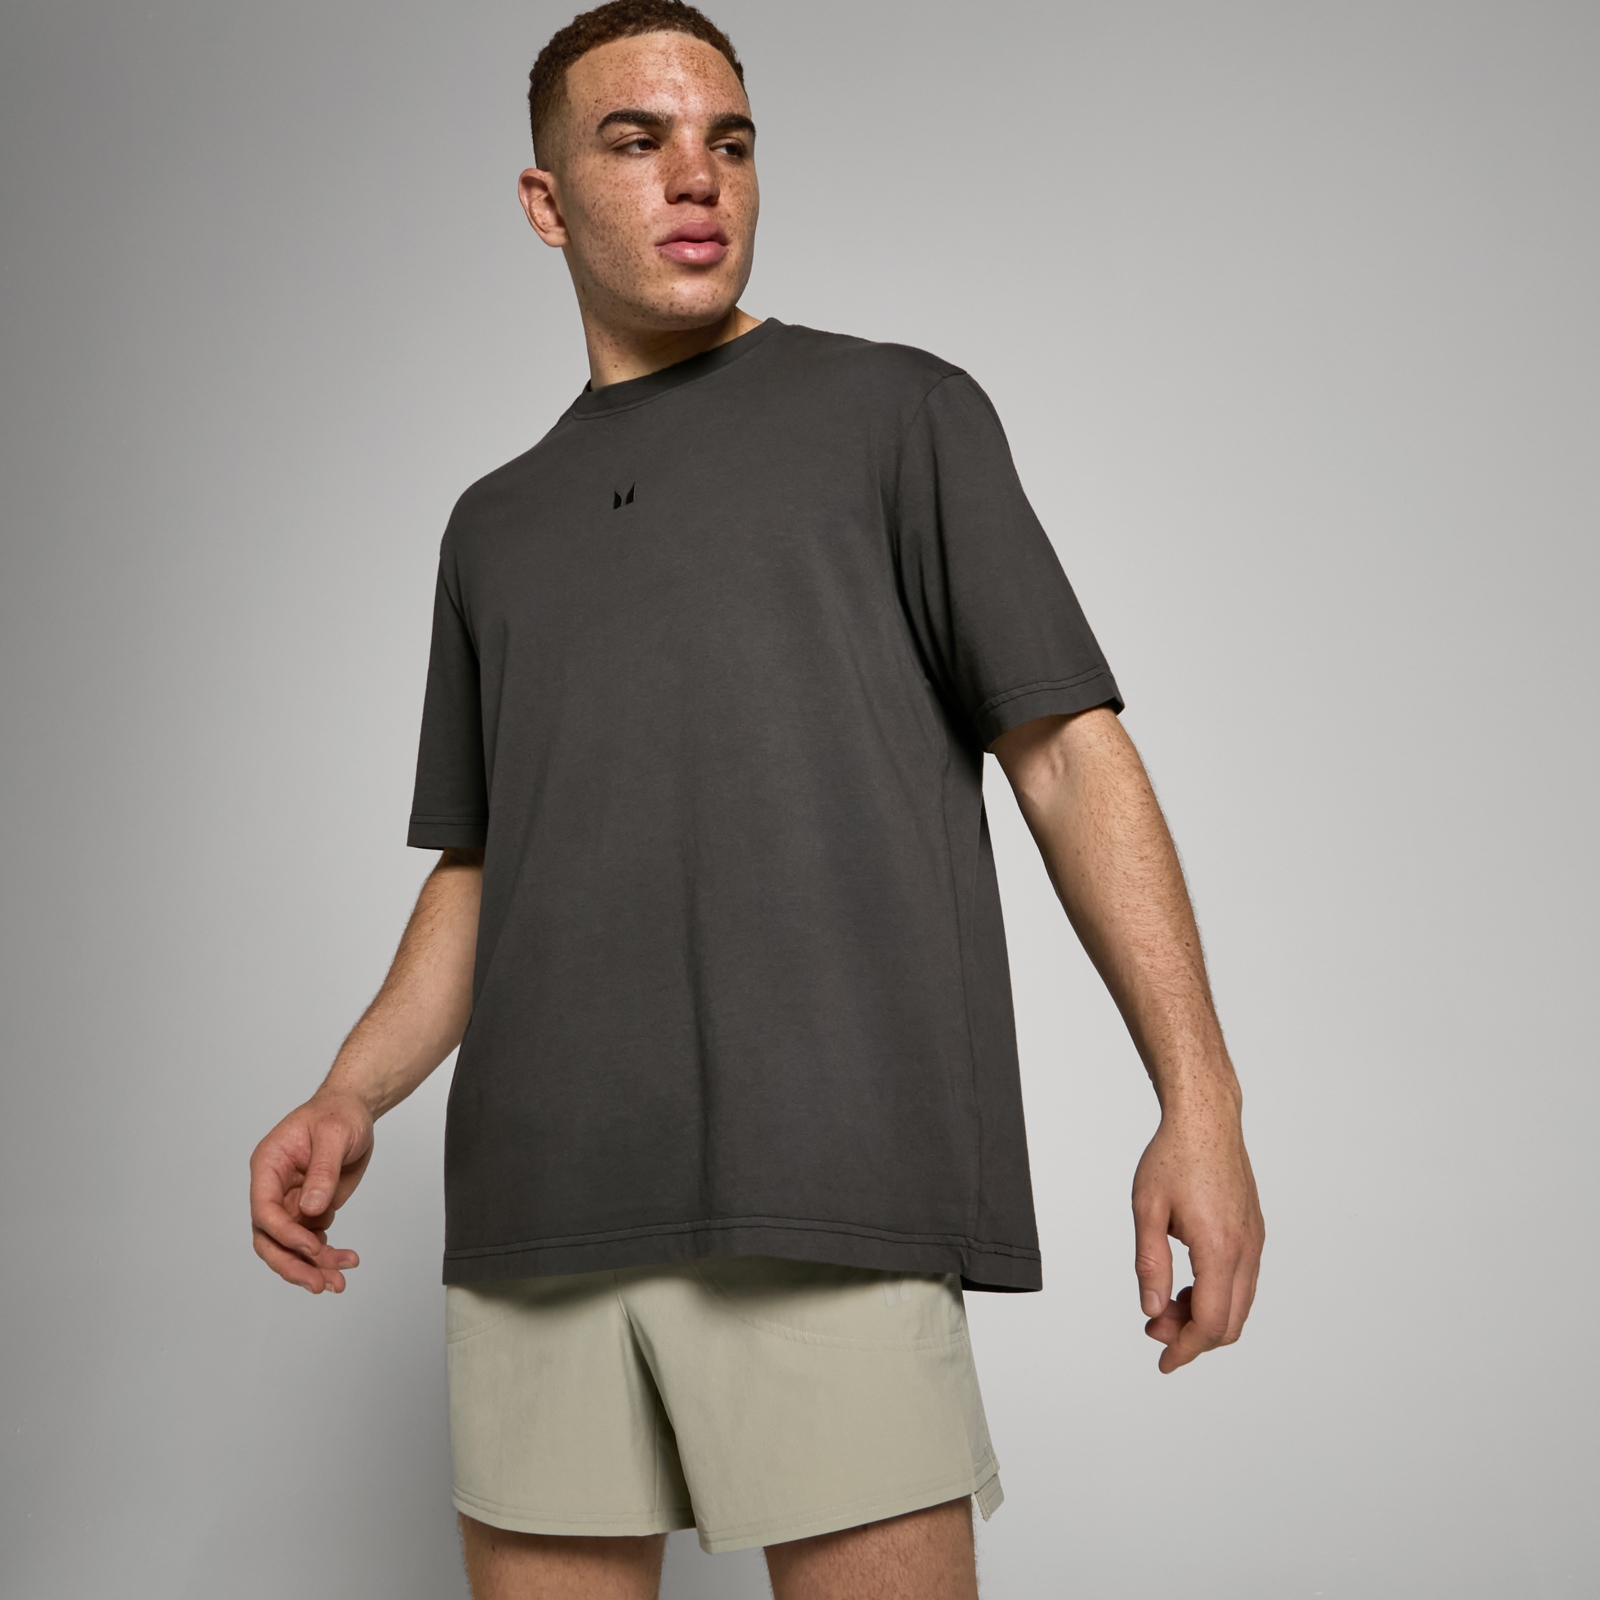 MP Men's Tempo Oversized Washed T-Shirt - Washed Black - L von MP